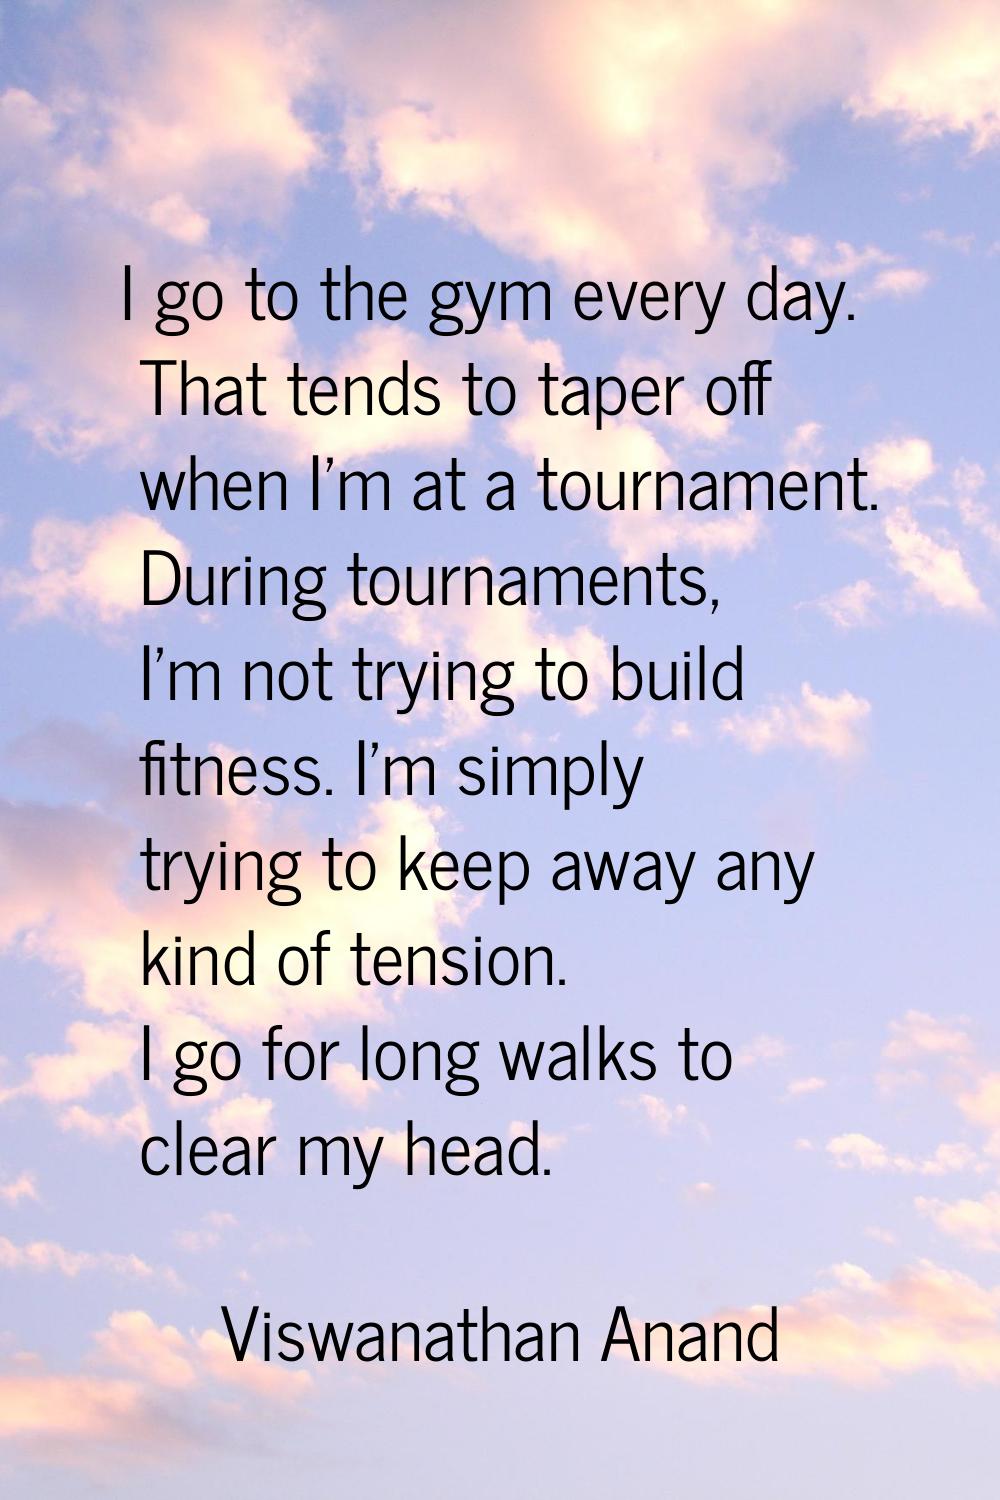 I go to the gym every day. That tends to taper off when I'm at a tournament. During tournaments, I'